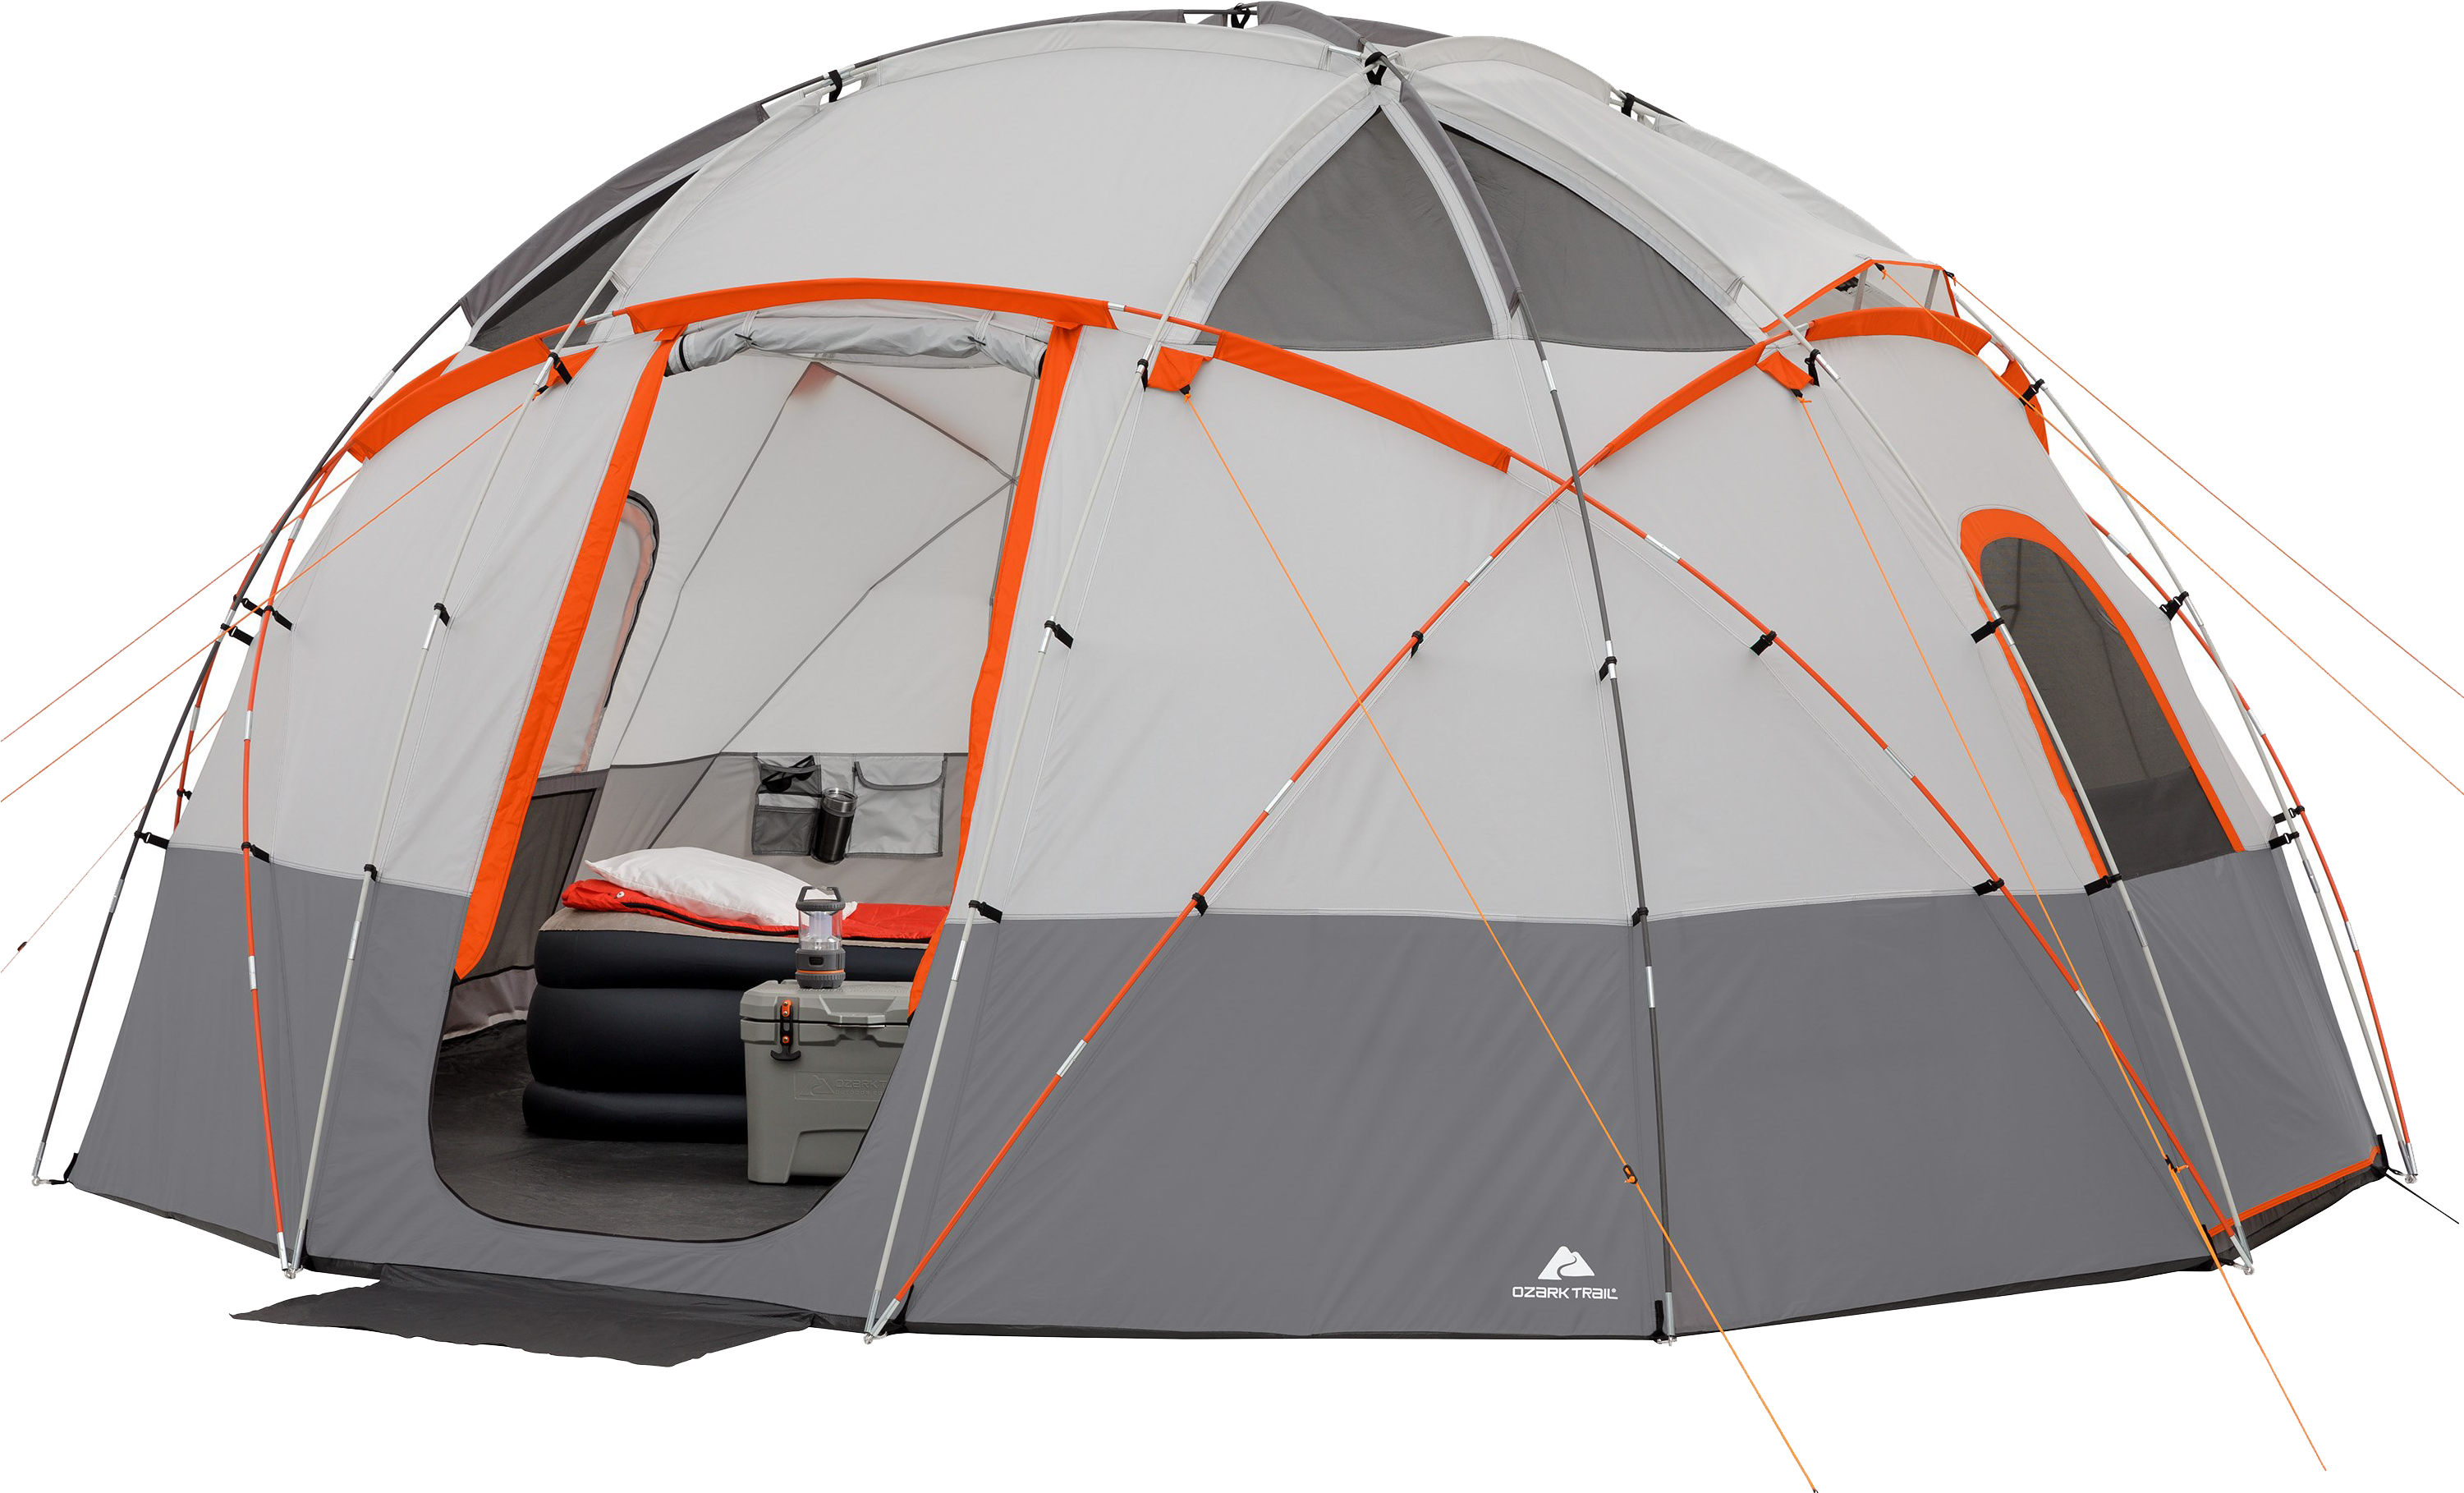 Dome Tent Outdoor Camping Setup